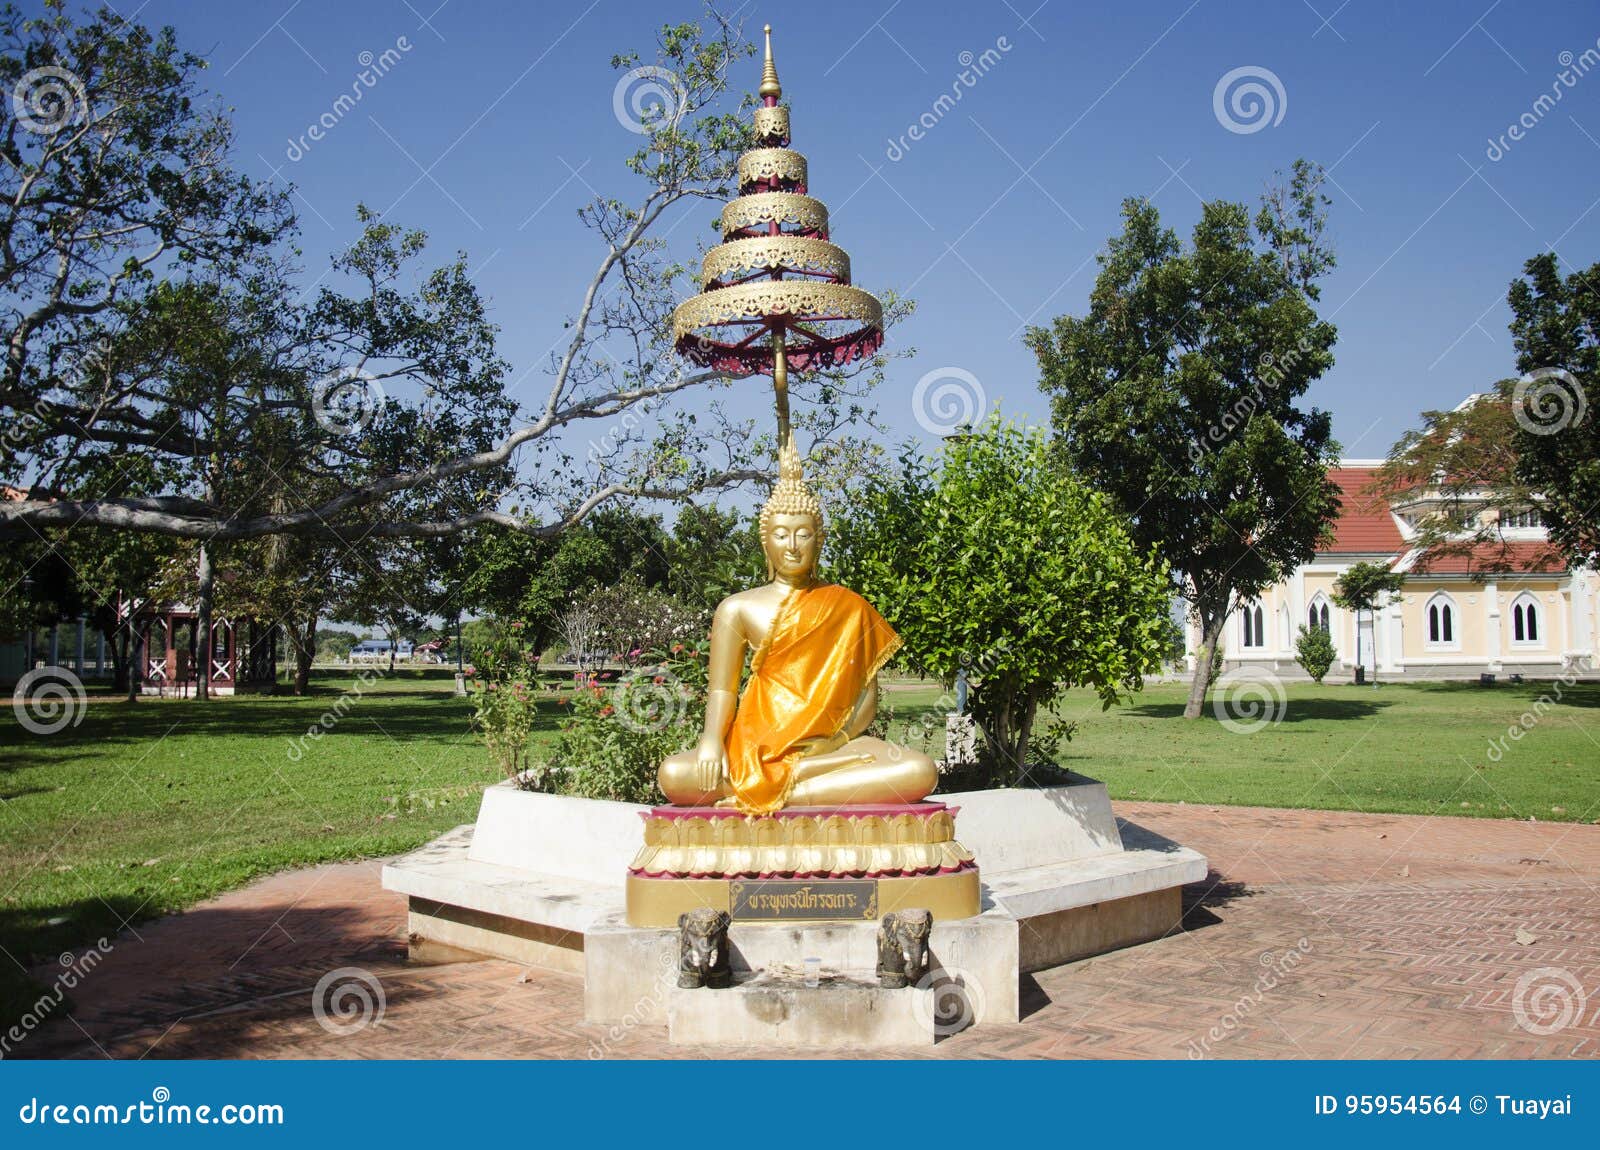 Gold Buddha Statue in Garden at Outdoor Editorial Stock Image - Image ...